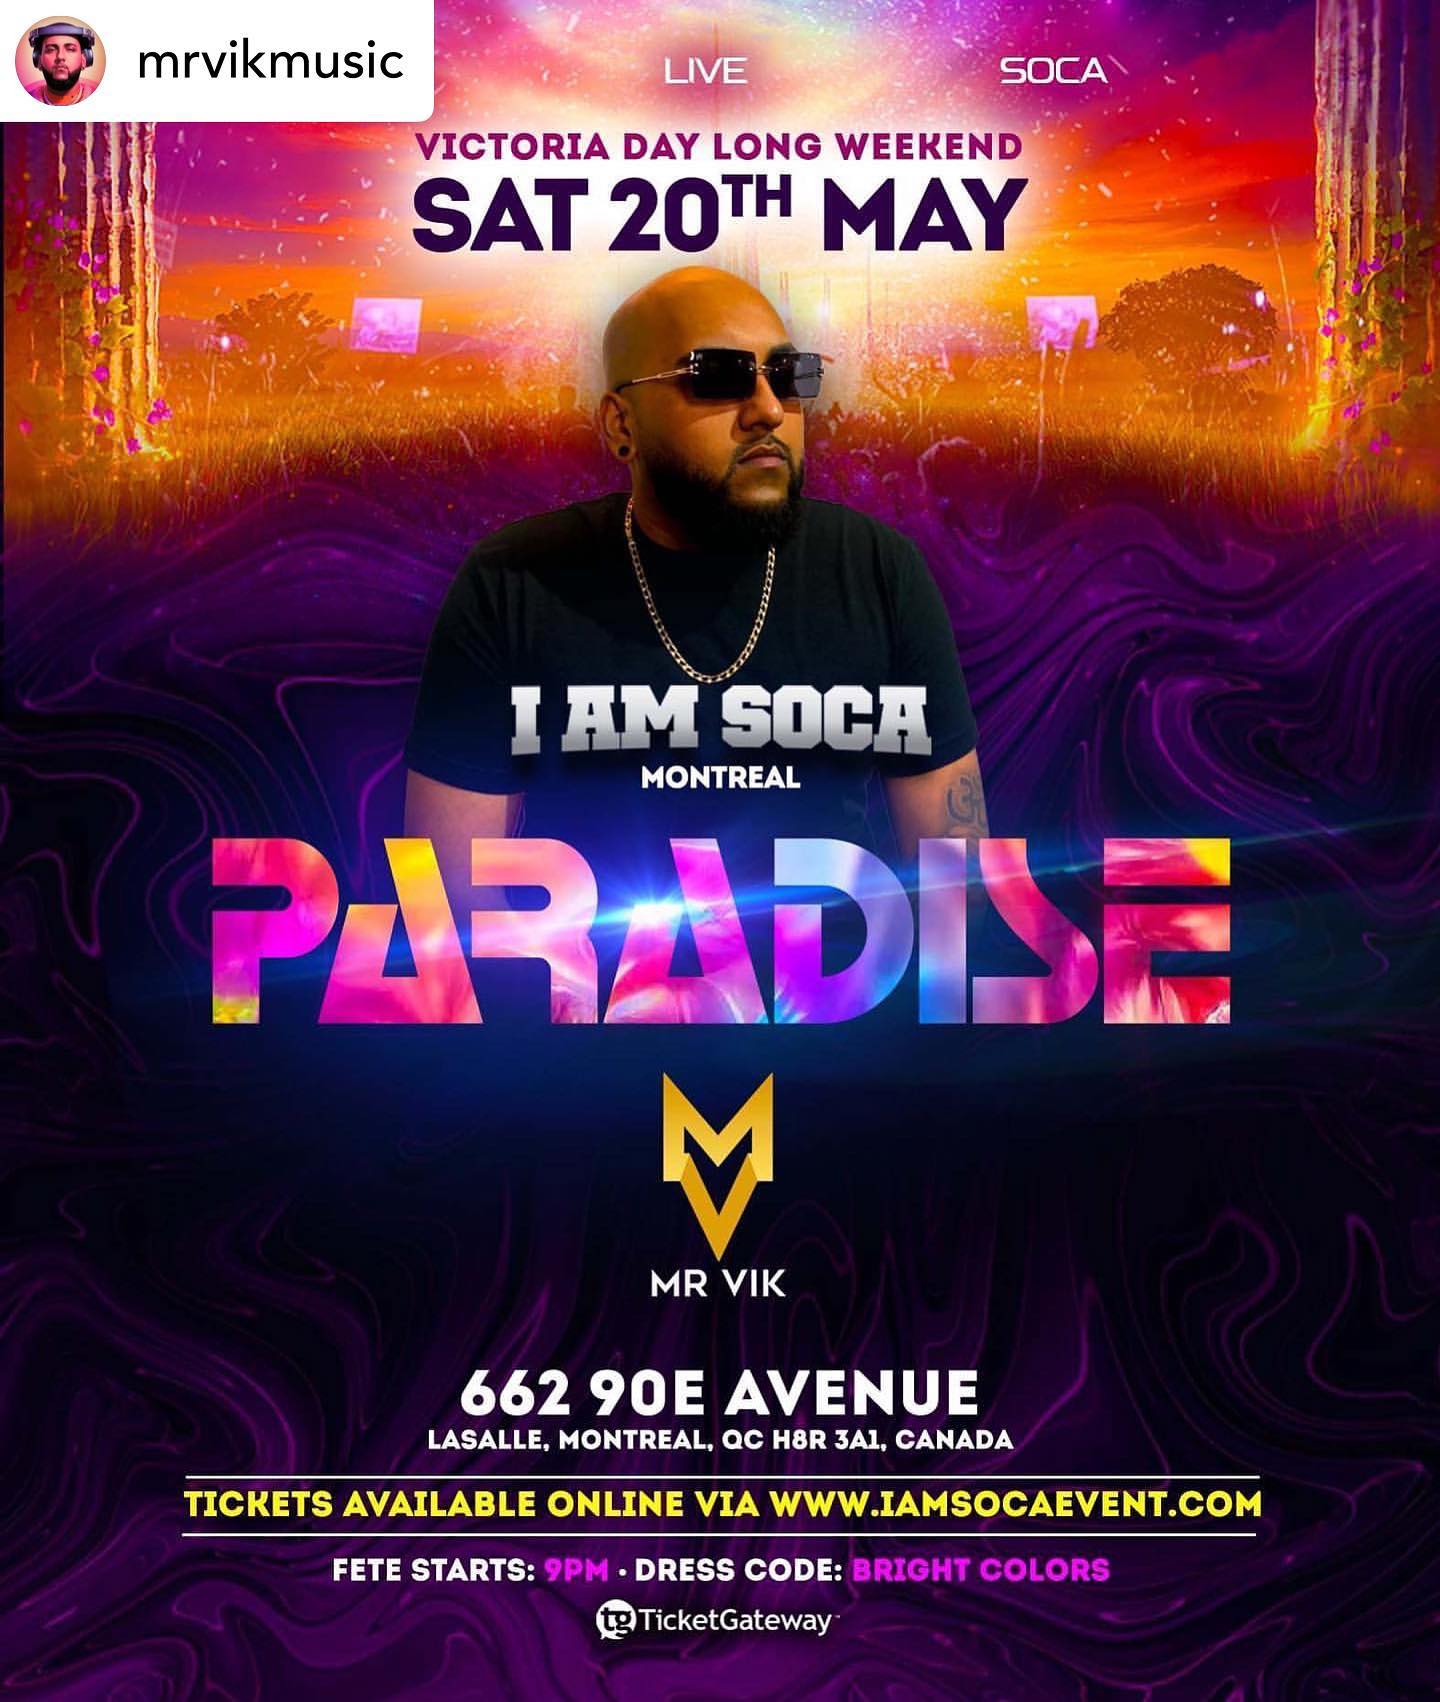 Our Dynamic cast of Soca entertainers are ready to welcome you to the 
SOCA PARADISE..

Mr Vik will Be Live On Stage

Saturday May 20th, 2023
I AM SOCA “PARADISE
@SuiteSix62

Dress Code: Bright Colors
🟡🟢🟠🟣

Tickets Available Online Via
www.IAmSocaEvent.com
www.Ticketgateway.com

Celebrate your birthday in PARADISE
Email: IAmSocaEvent@gmail.com

Follow • Like • Share
@IAmSocaEvent